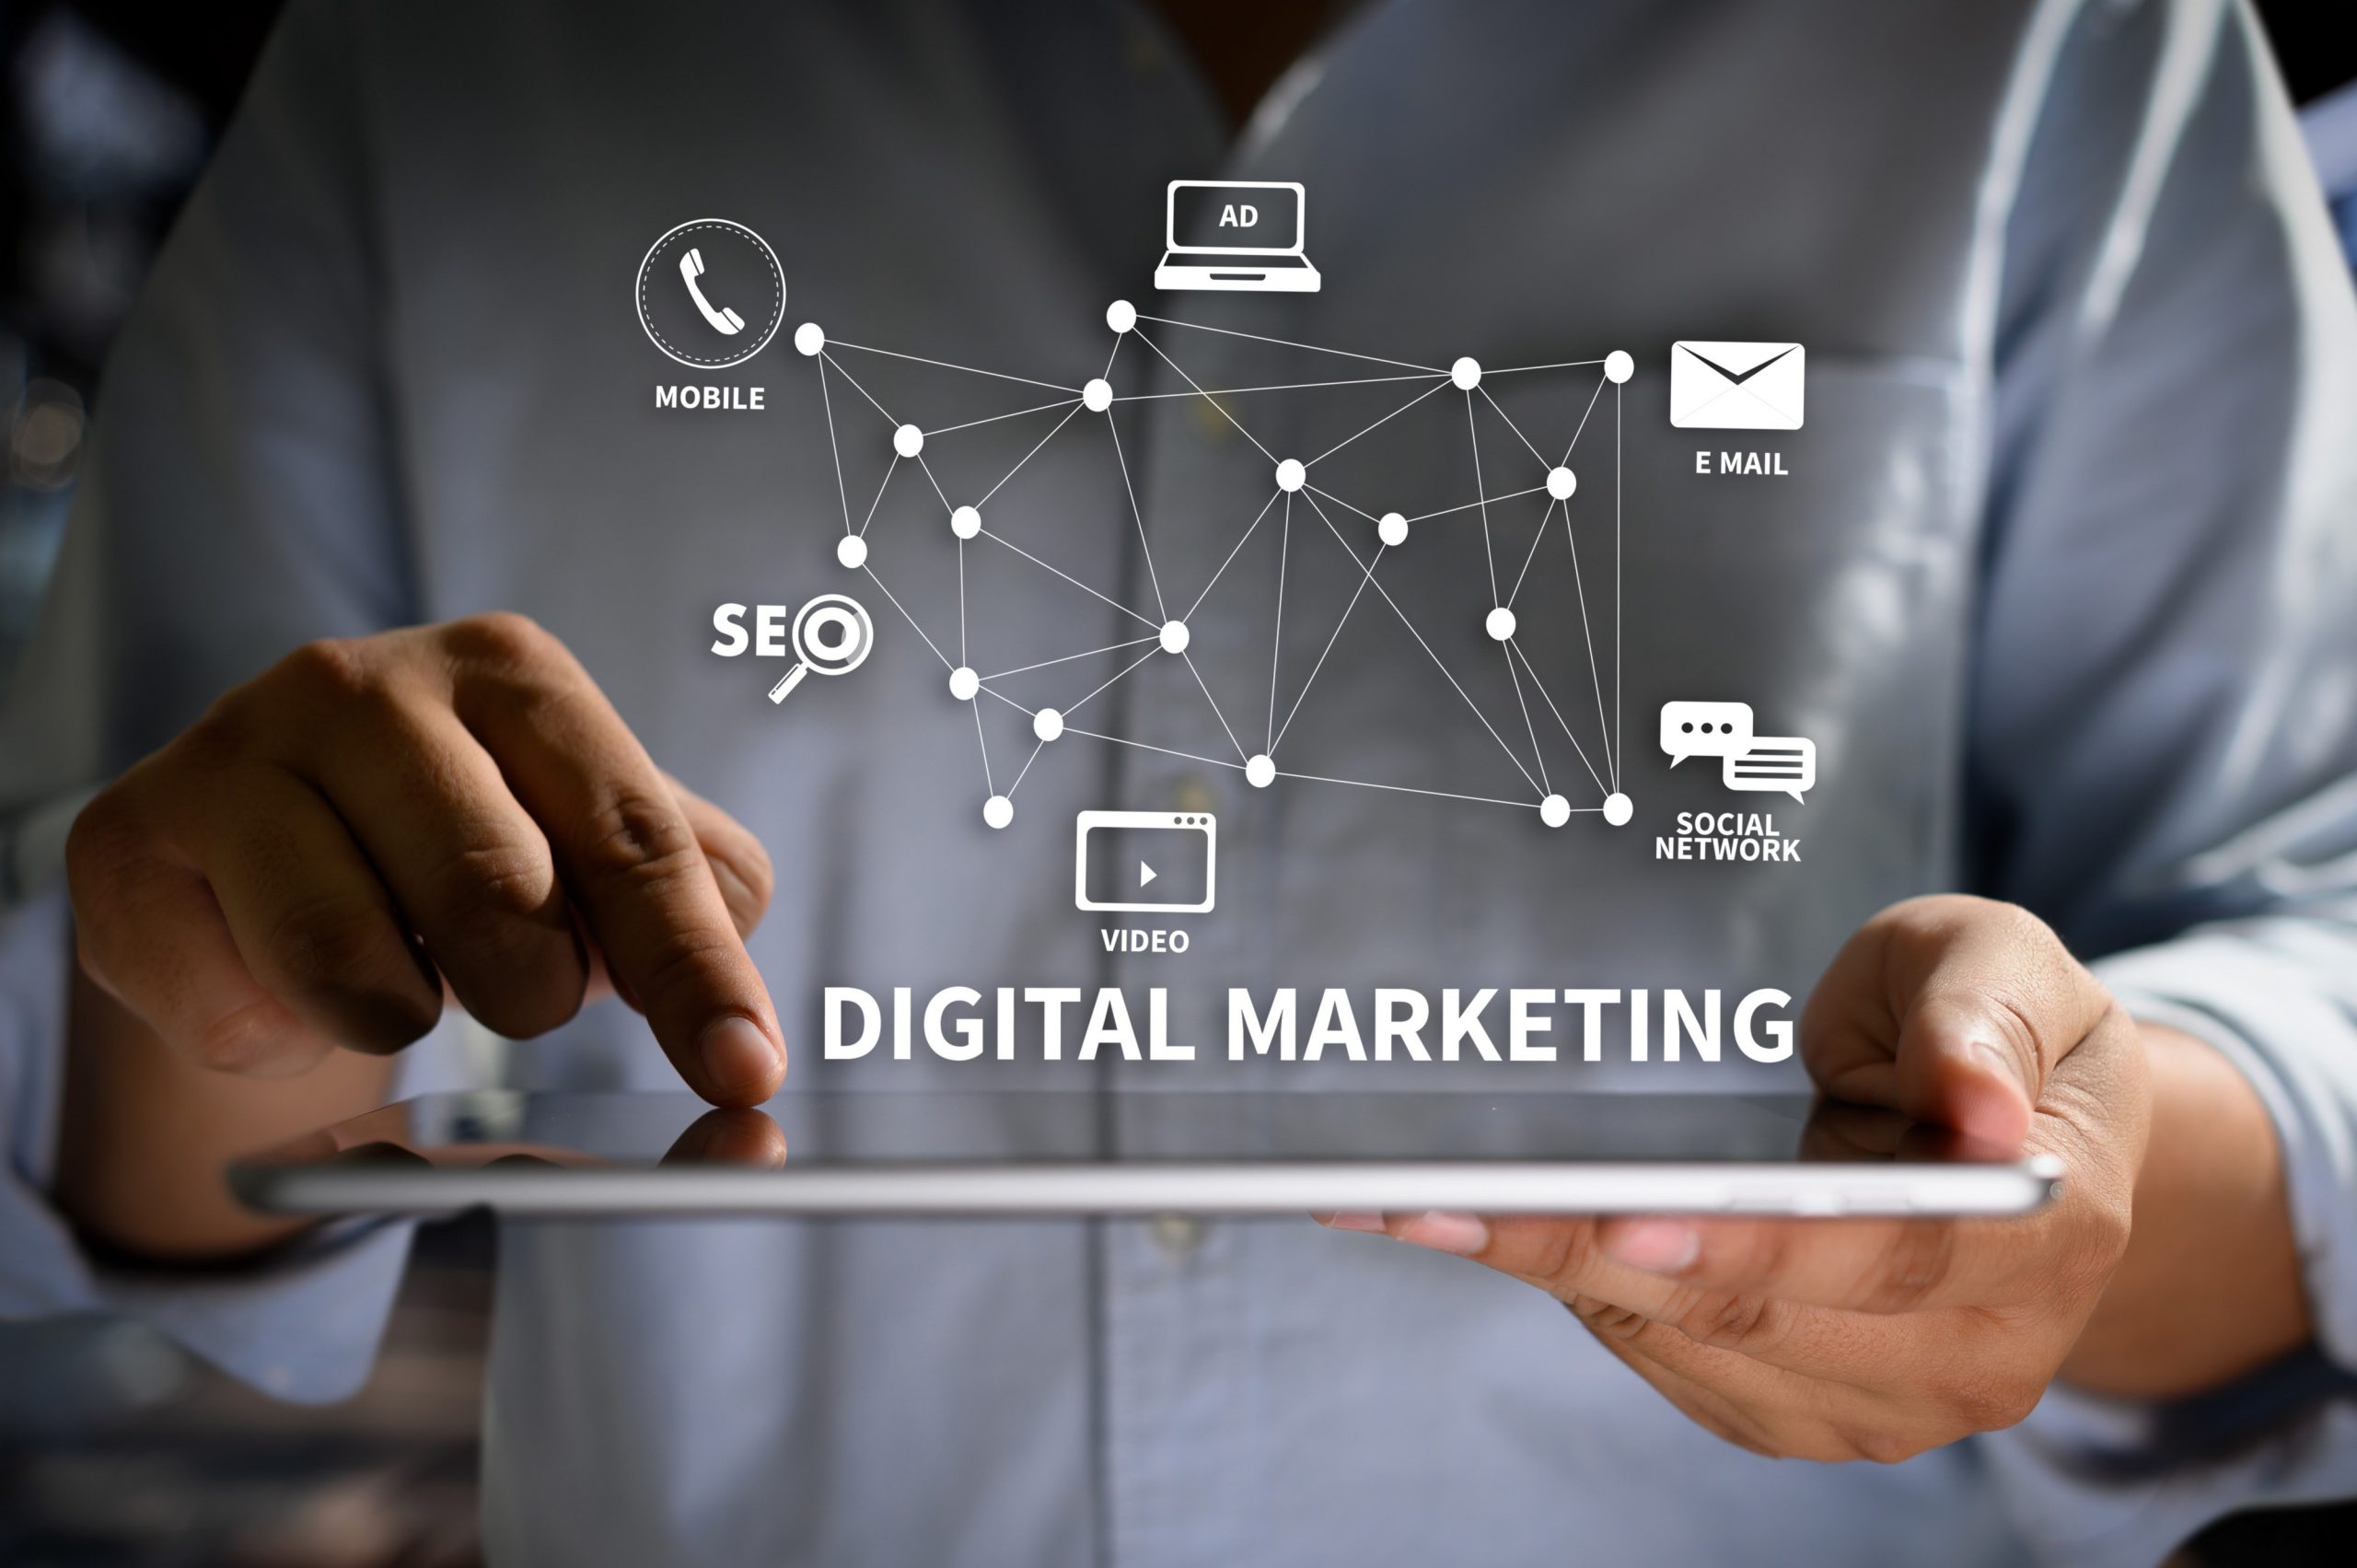 10 practical ways to grow your local business with digital marketing in 2021  - Marketing Tech News